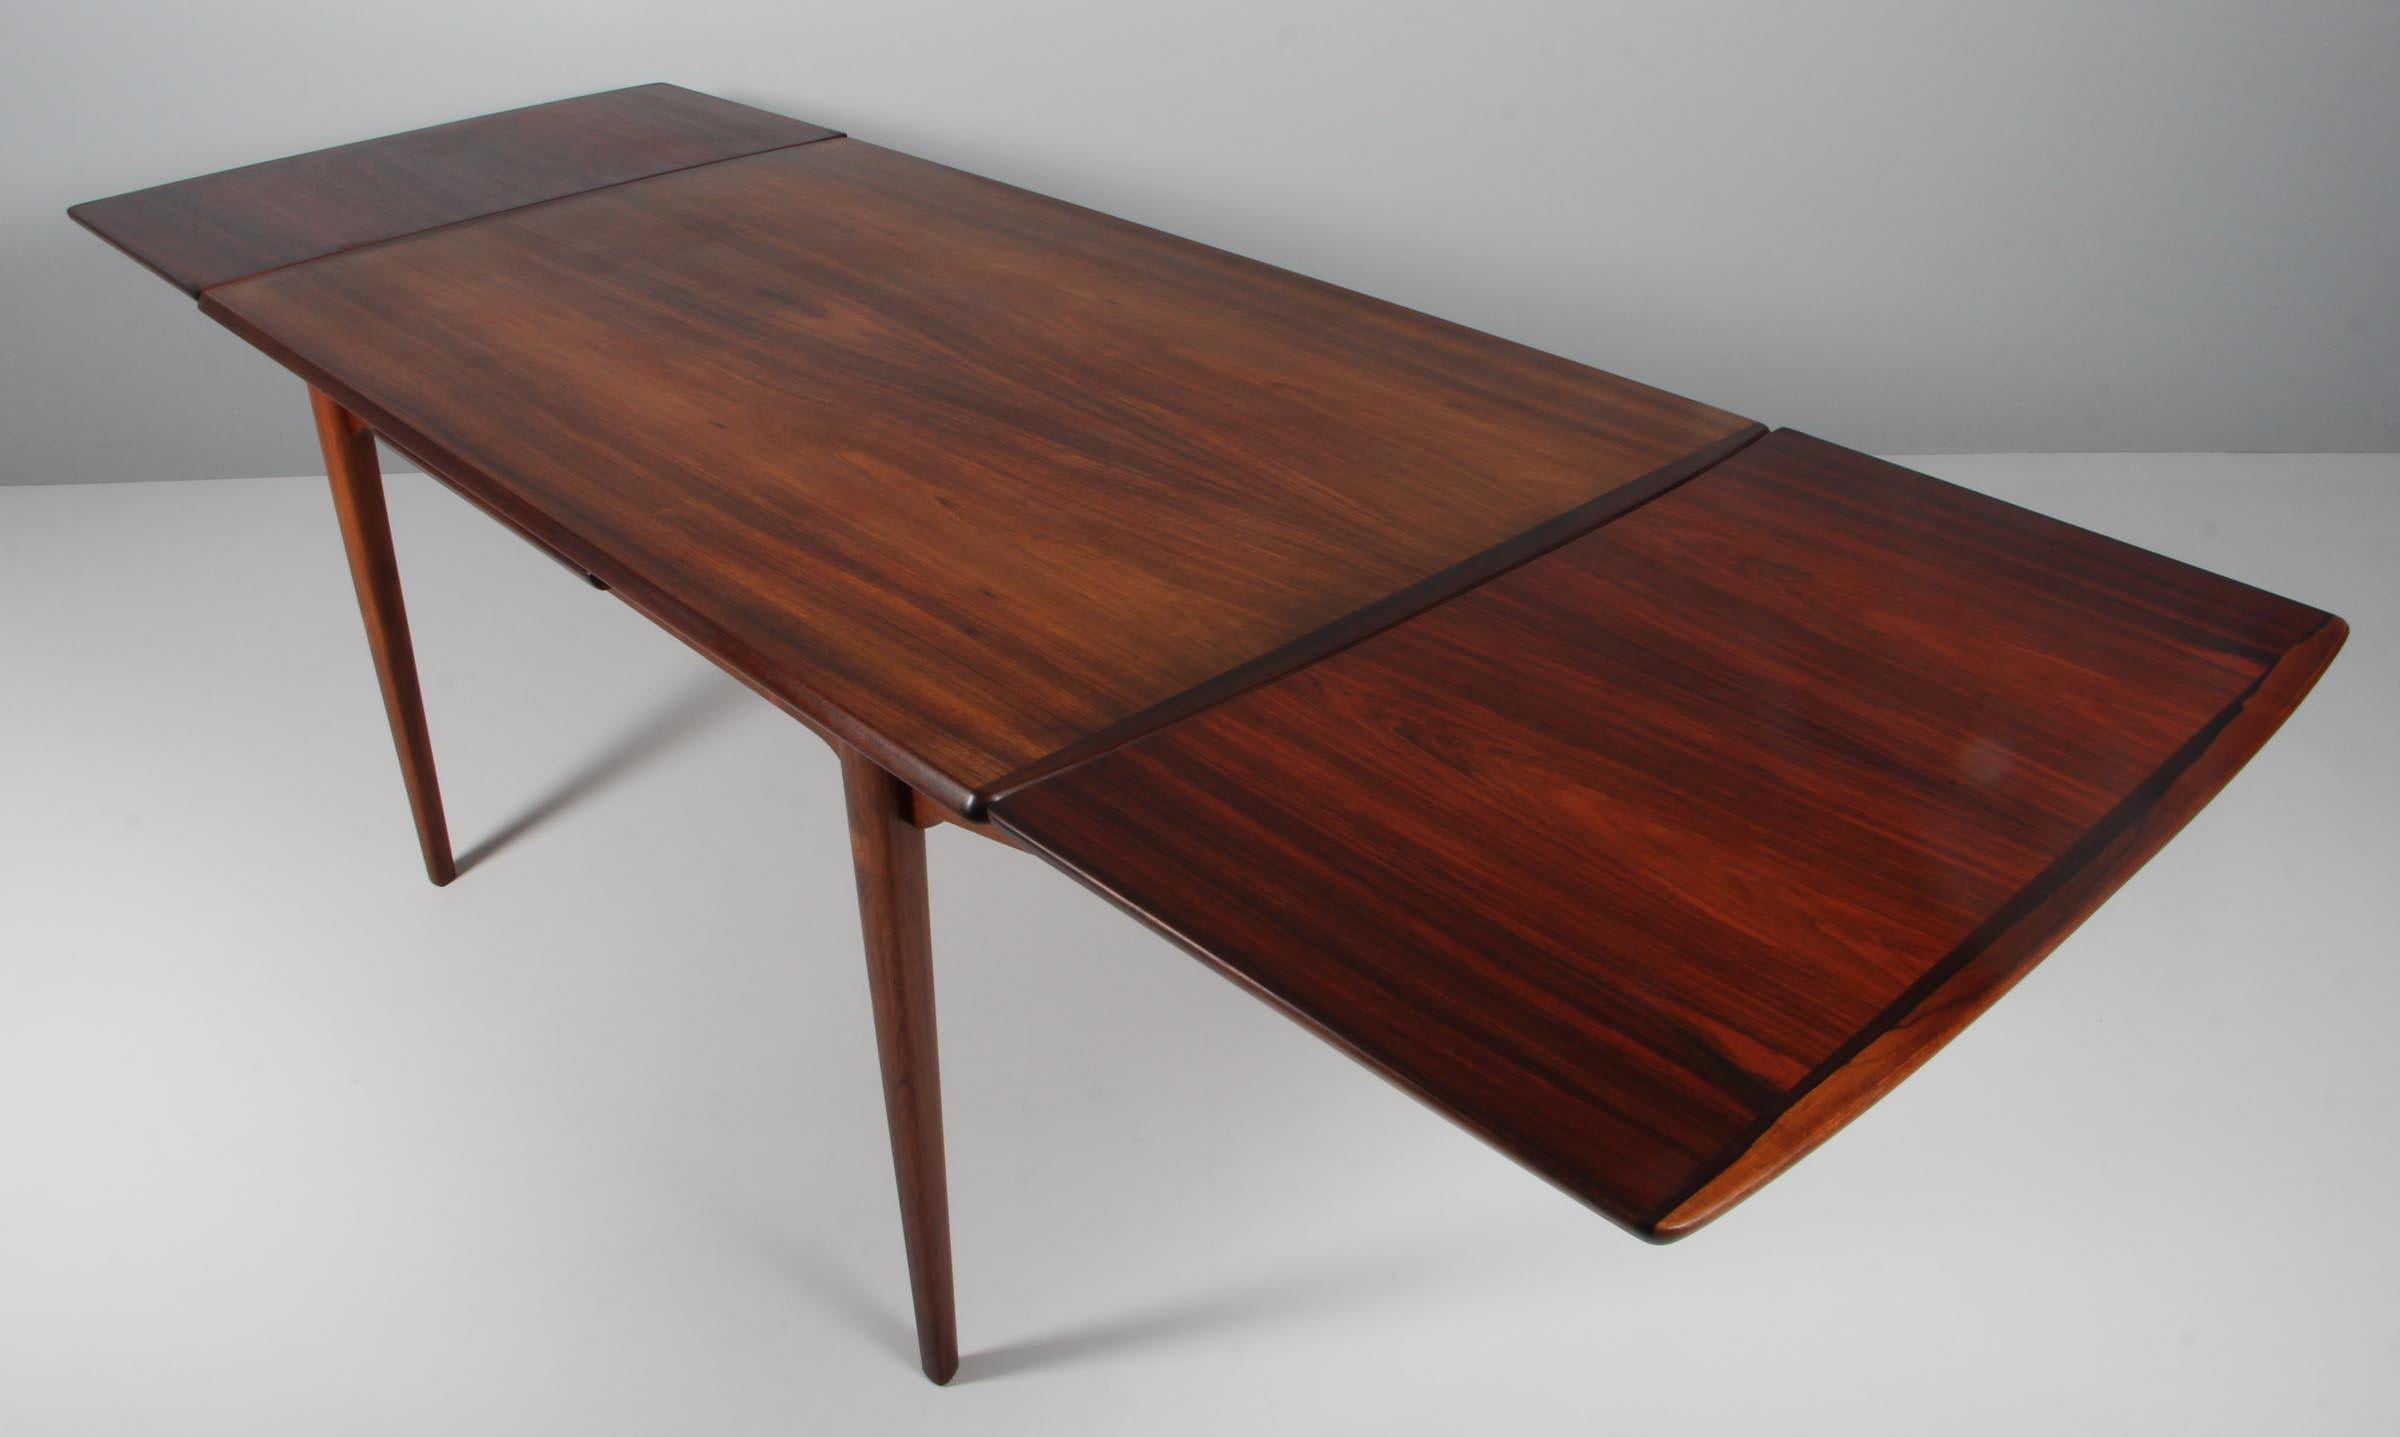 HP Hansen dining table with two extension leafes.

Made in partly solid rosewood.

Made by HP Hansen in Denmark in the 1960s.